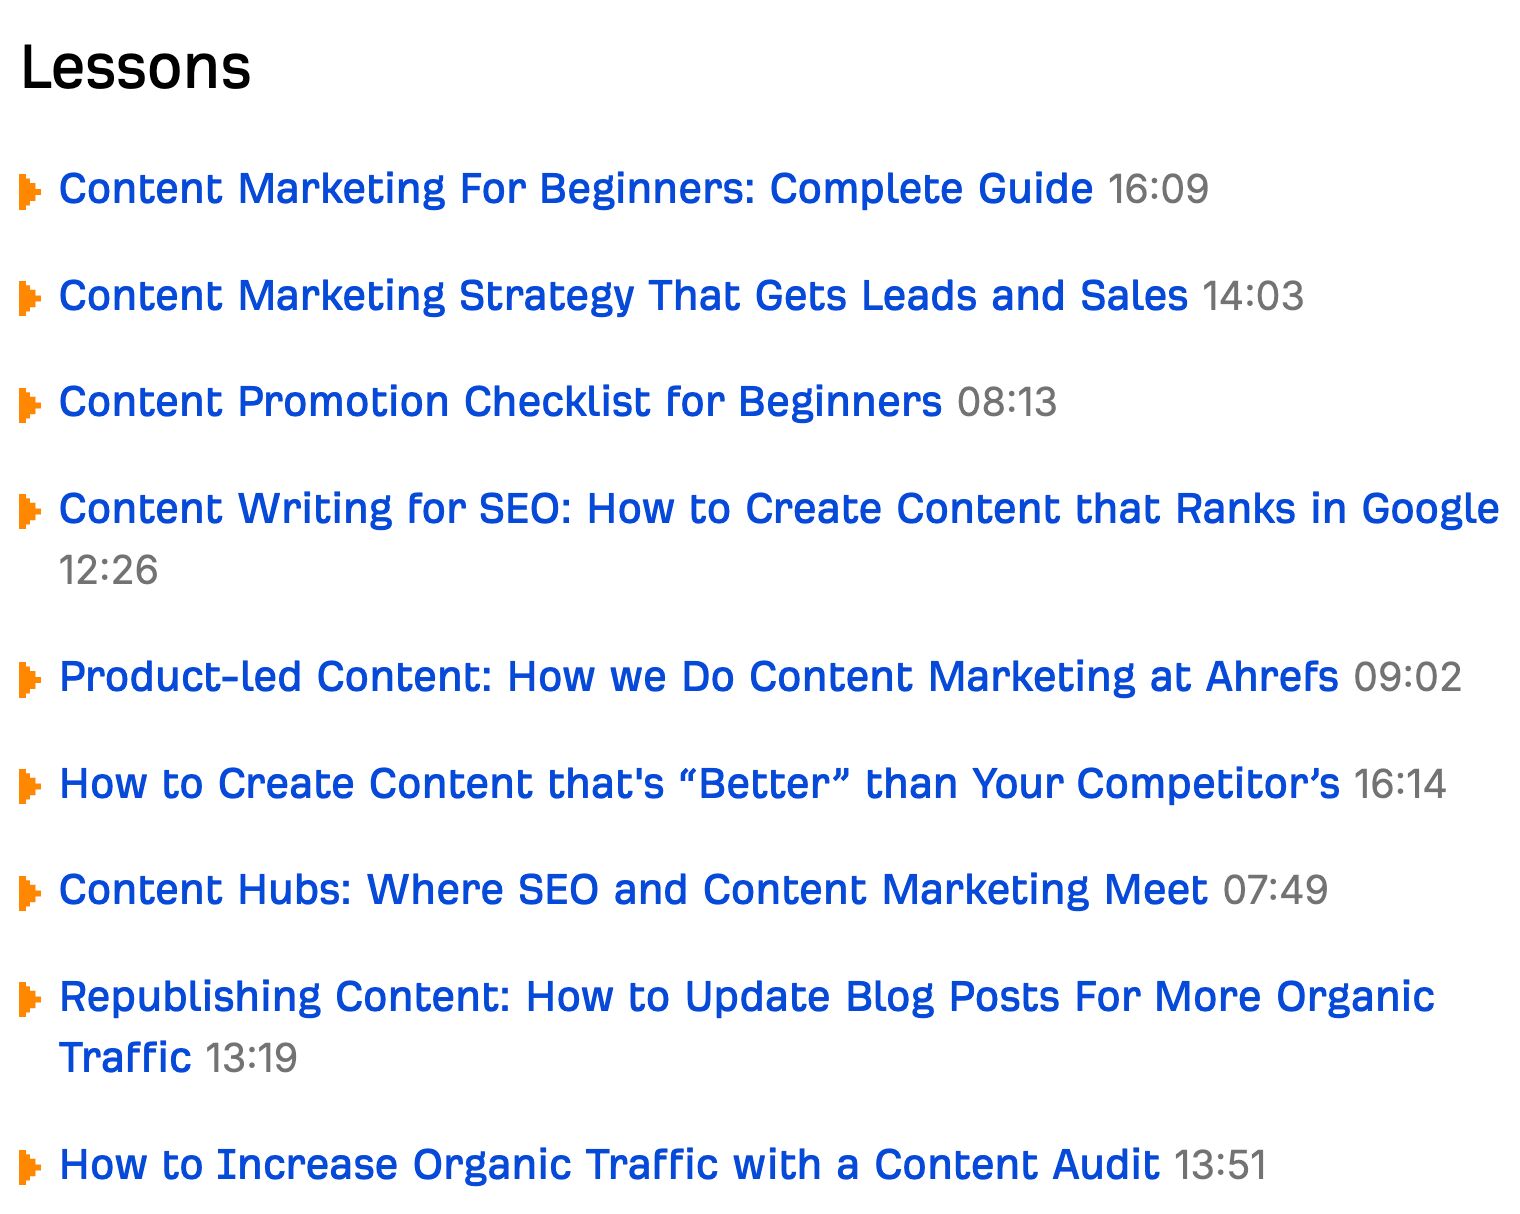 Lessons for our content marketing course